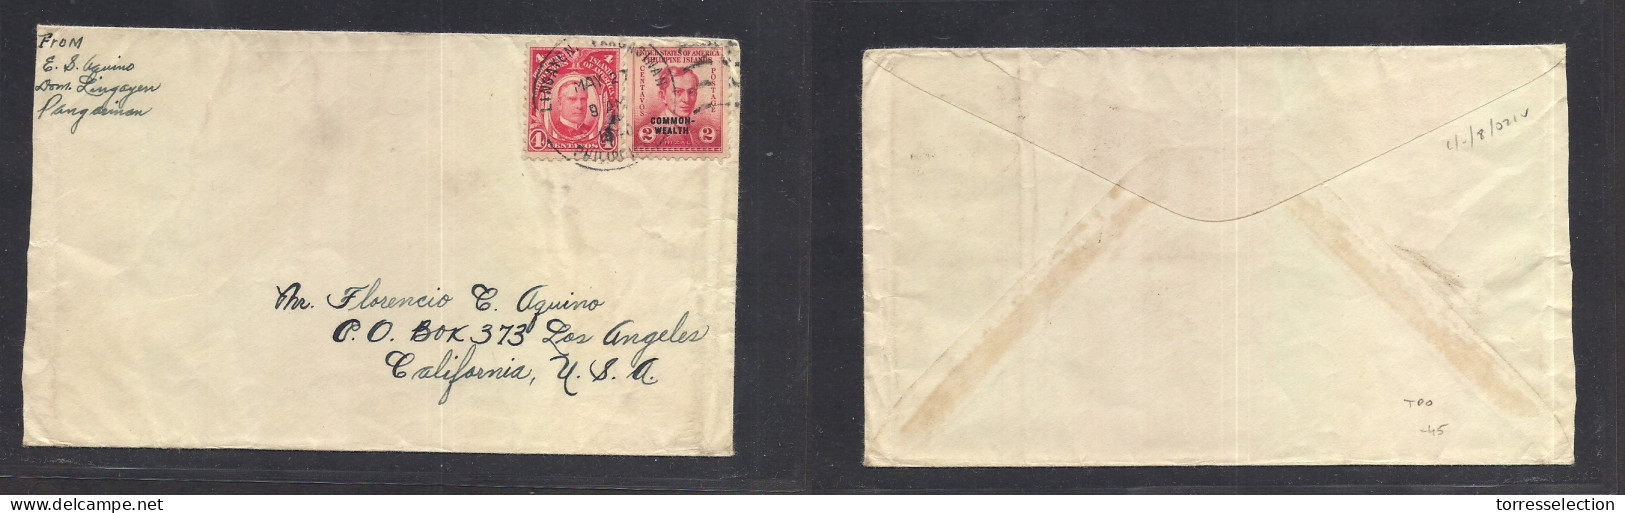 PHILIPPINES. 1940 (27 May) TPO Lingayen Pangasinan - USA, CA, LA. Mixed Issue Multifkd Env VF TPO Difficult To Read Comp - Philippinen